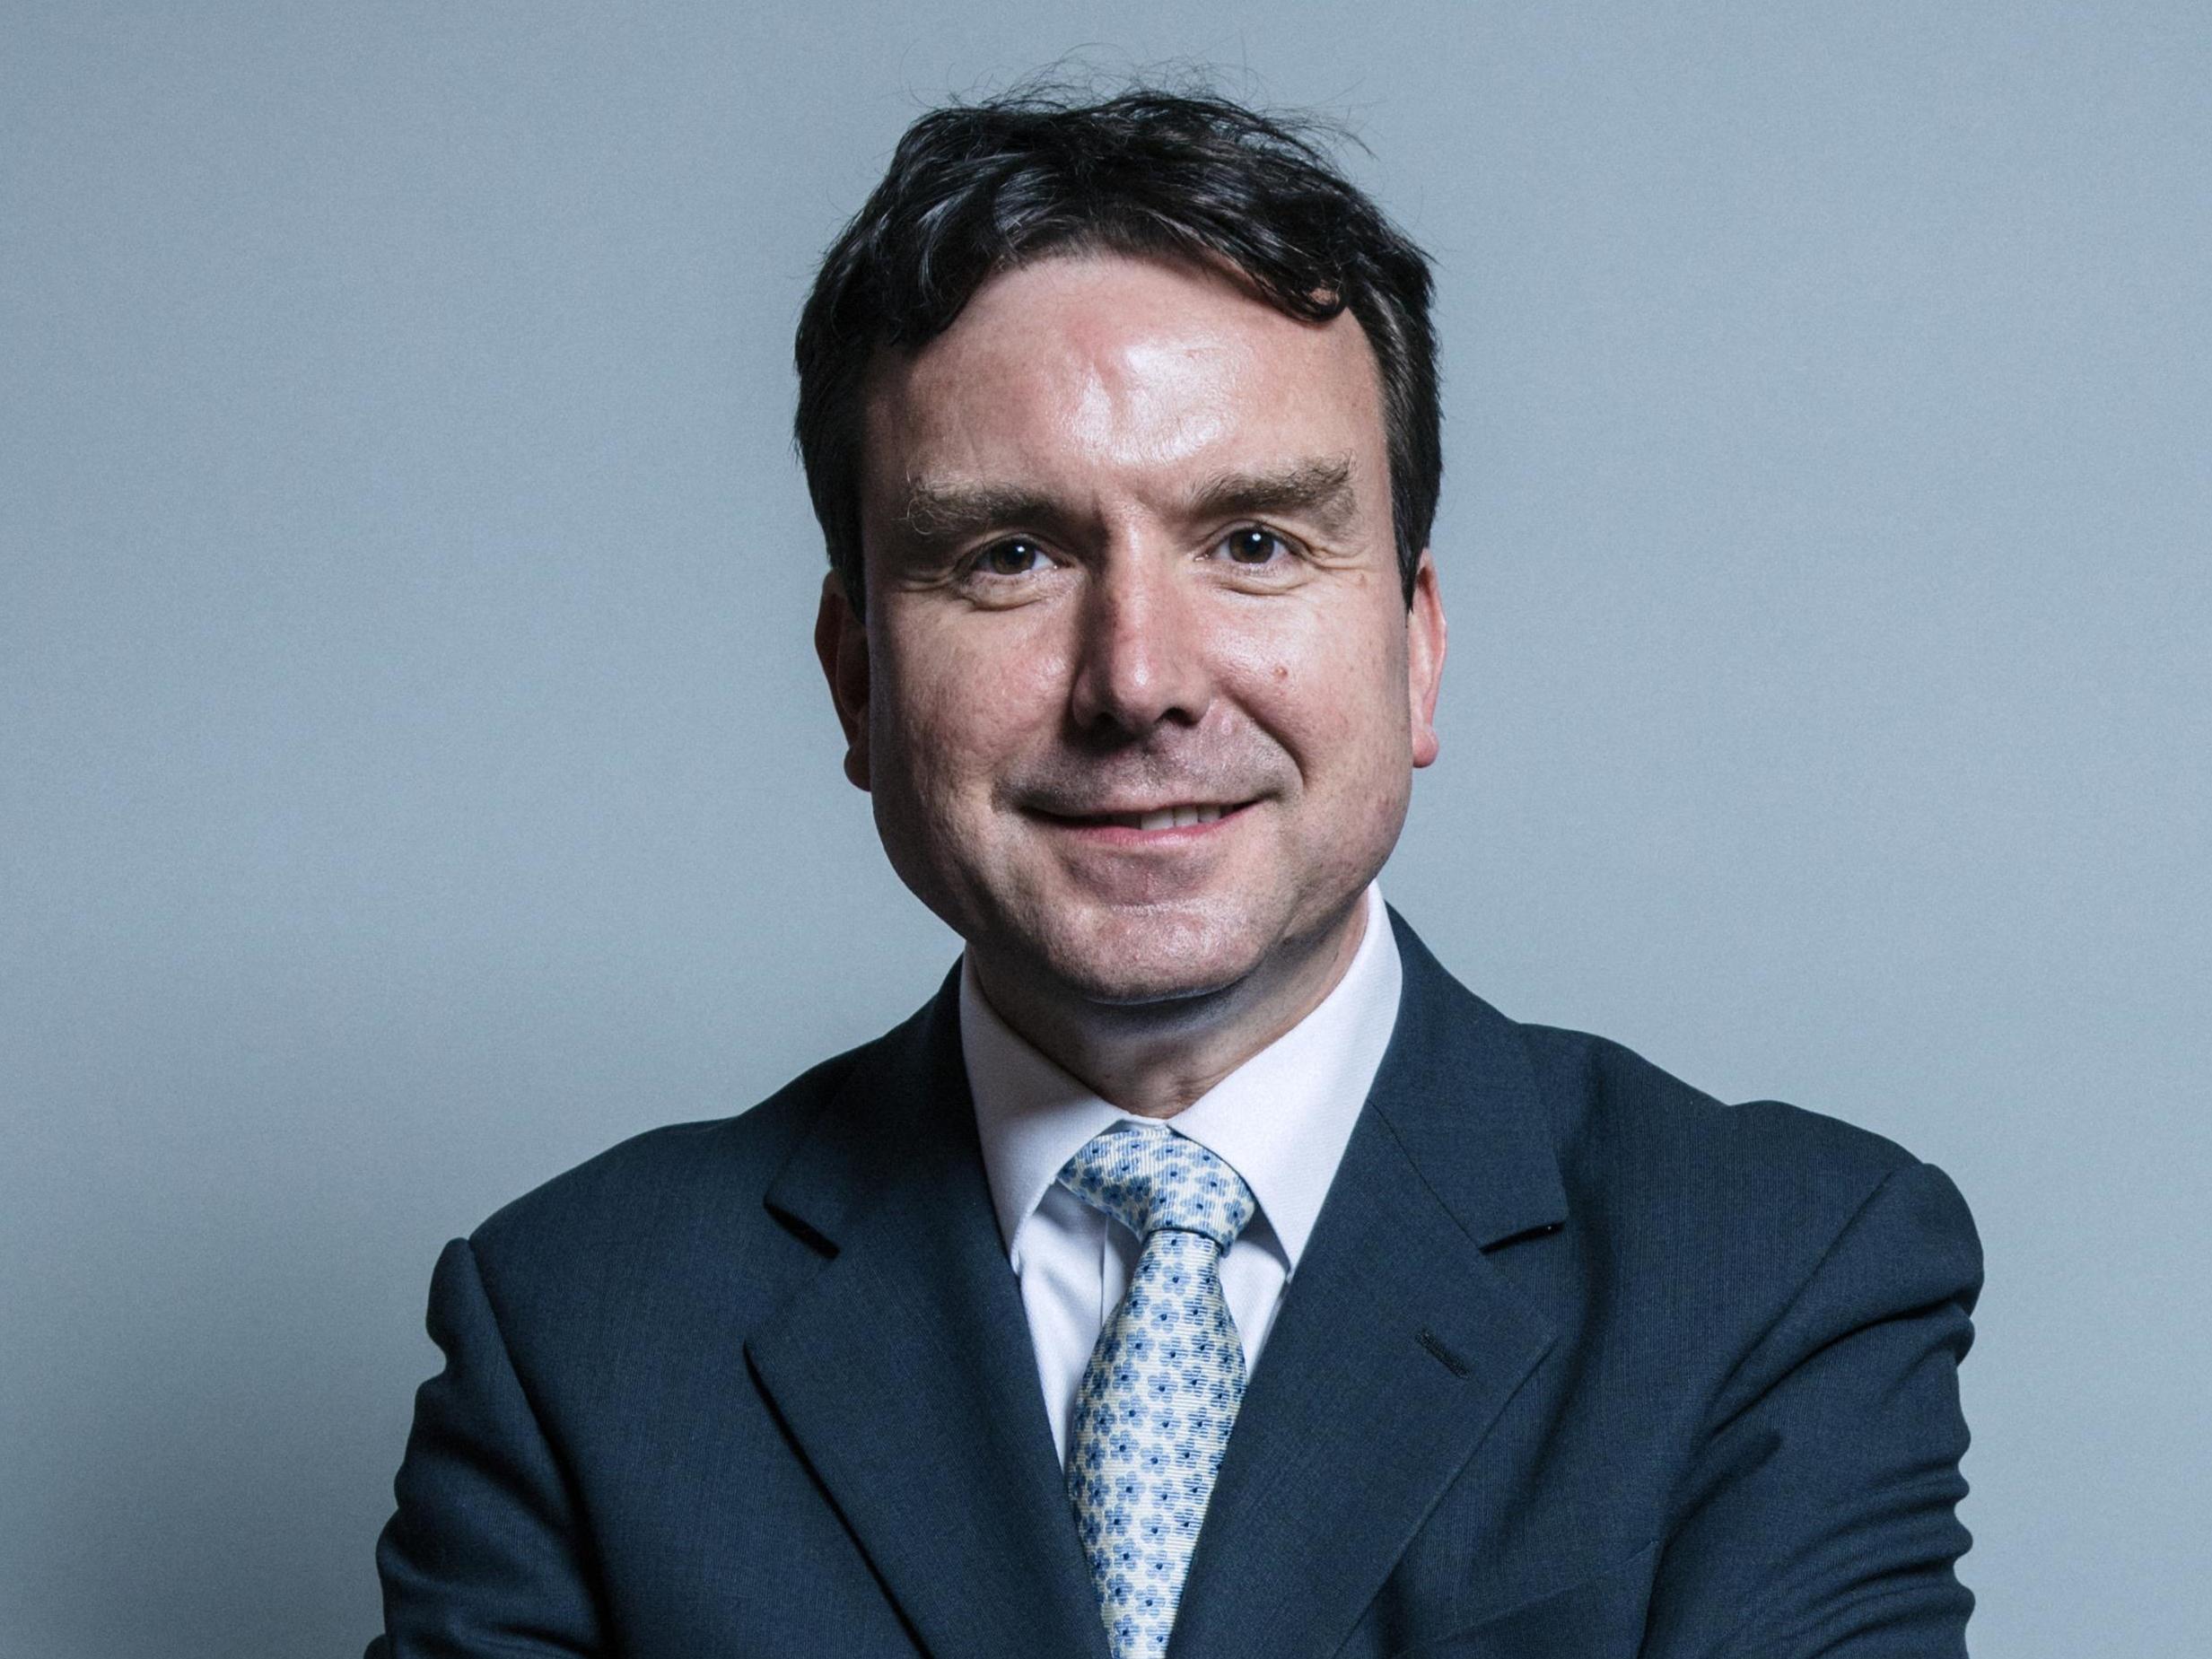 Small business minister Andrew Griffiths has resigned